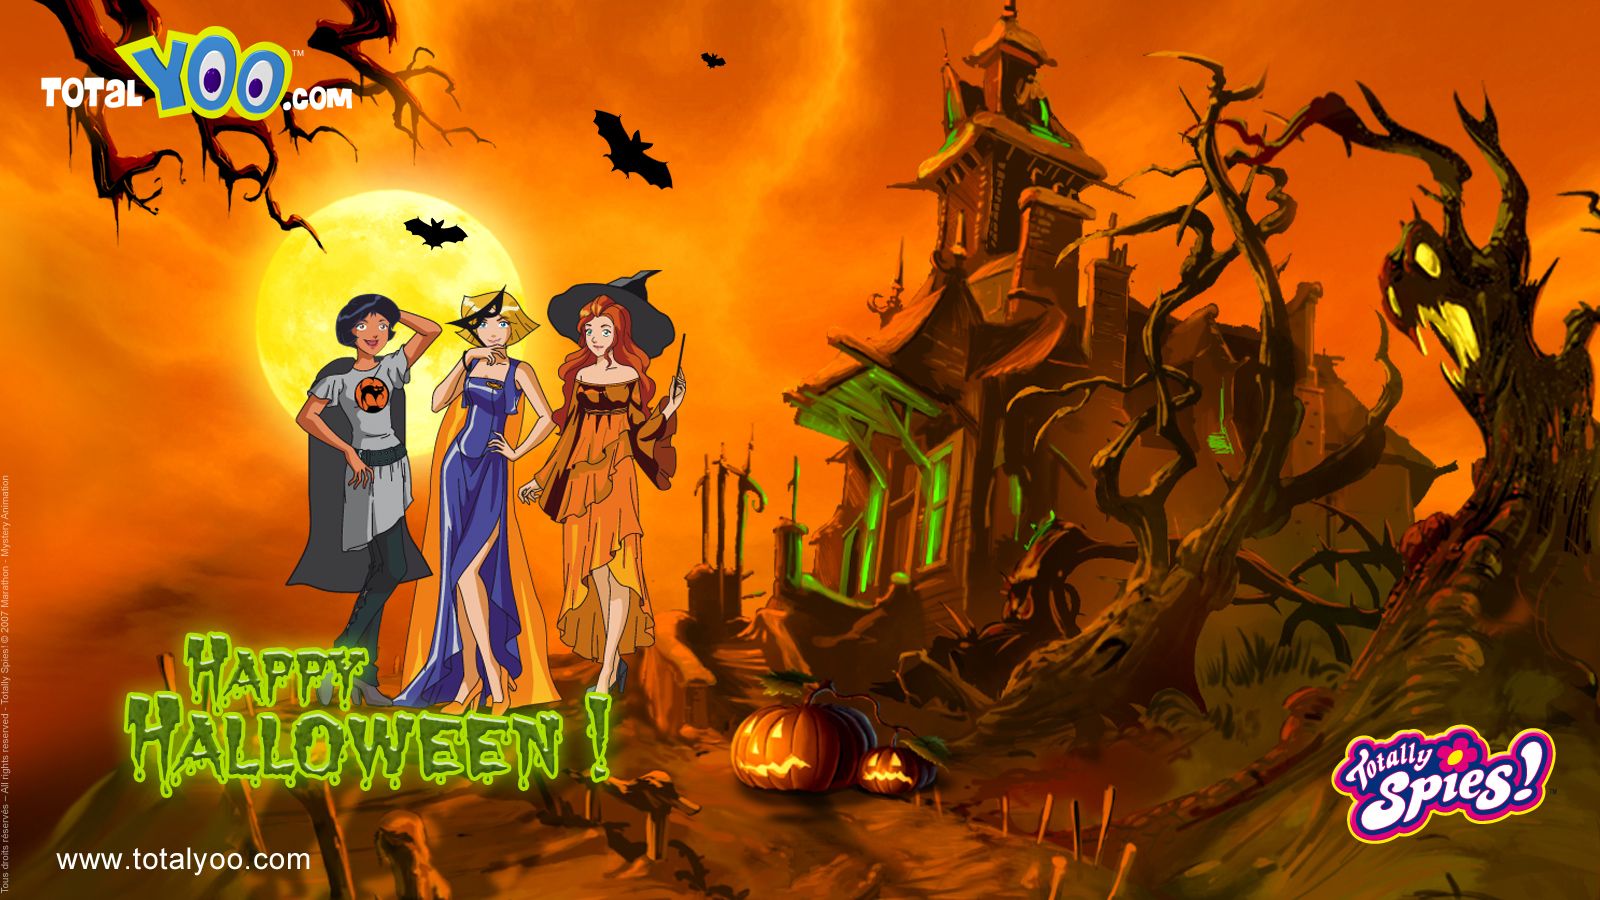 Totally Spies Halloween > Wallpapers | TotalYOO